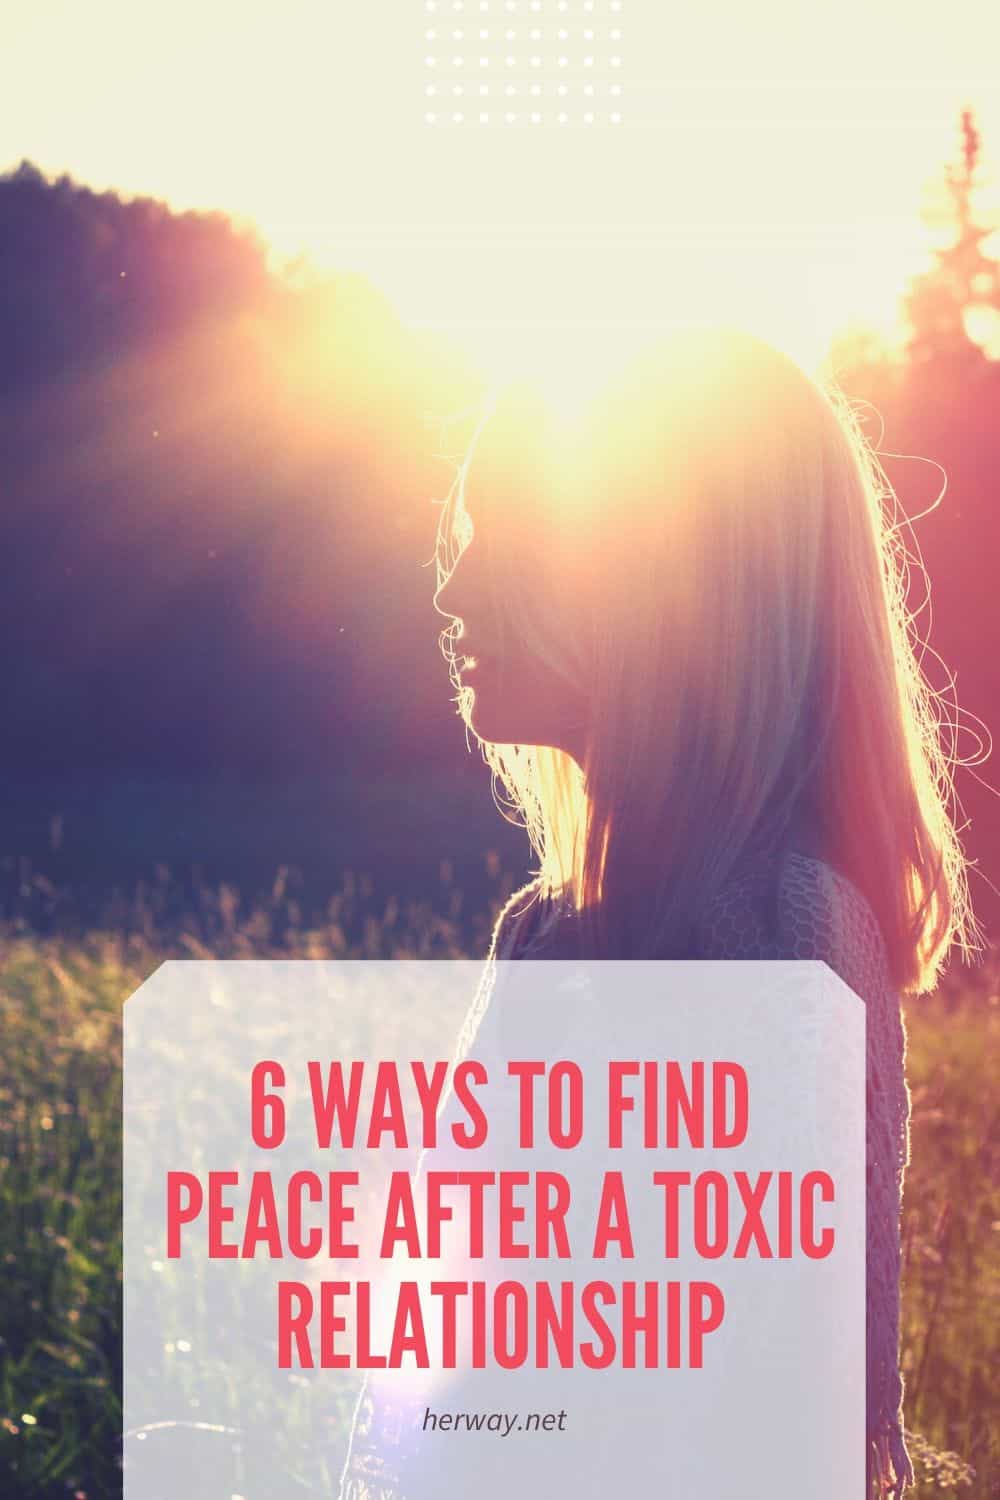 6 Ways To Find Peace After a Toxic Relationship